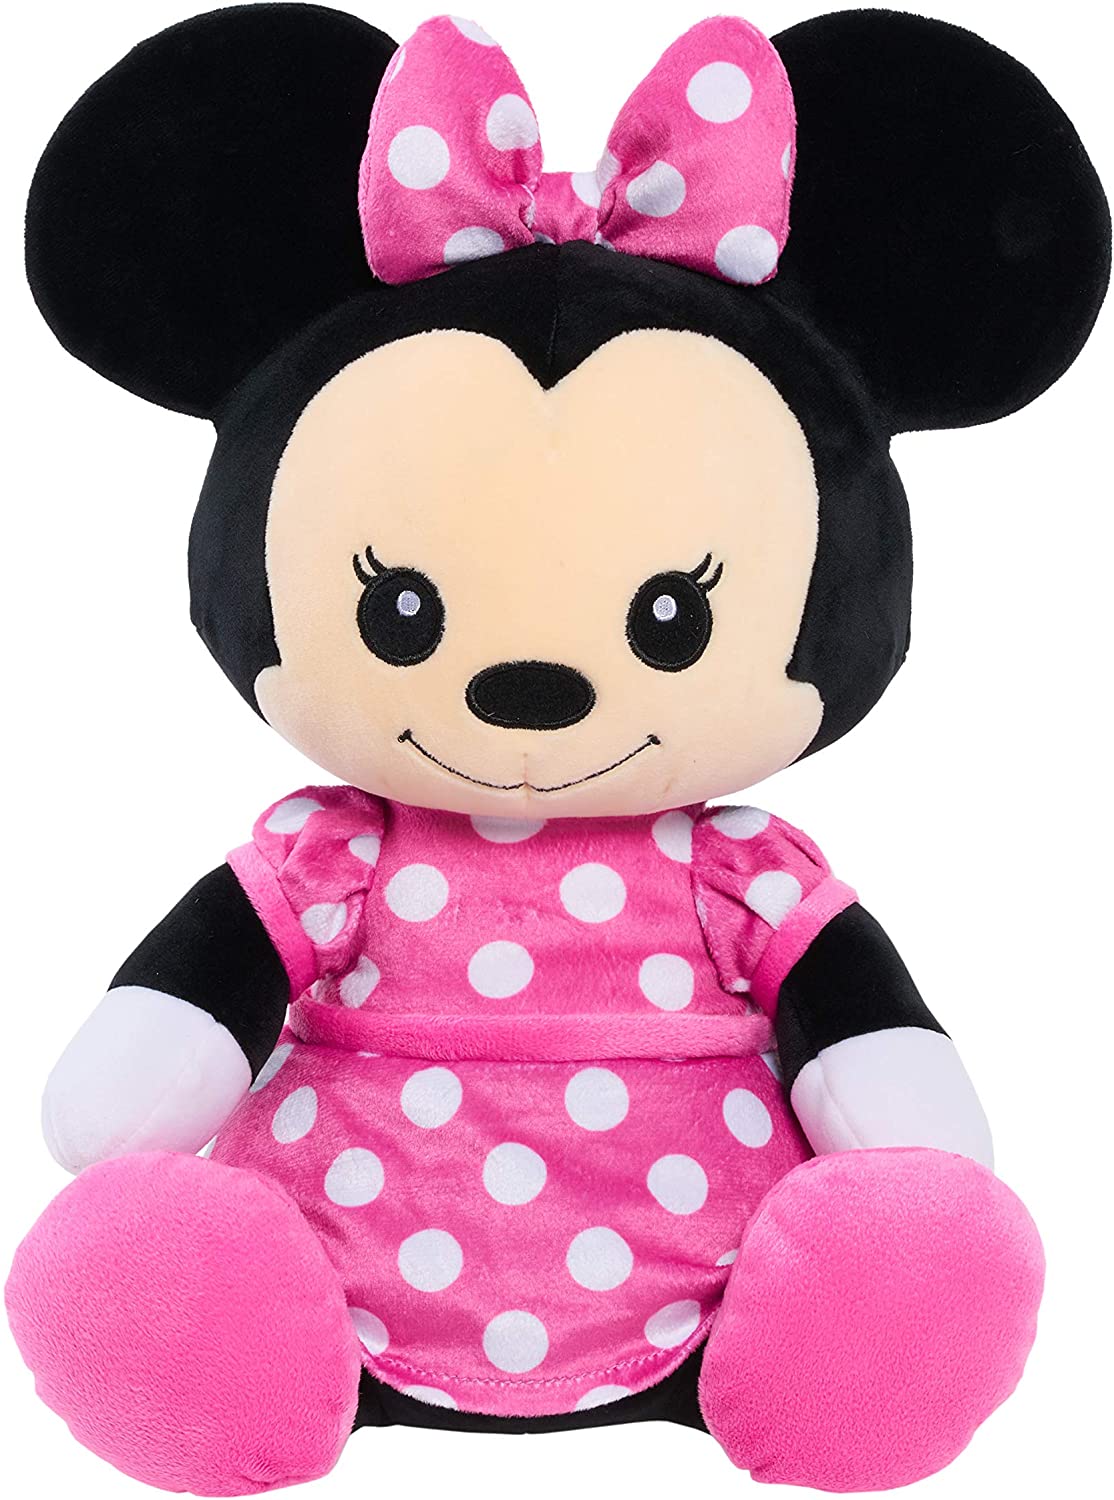 14" Just Play Disney Classics Minnie Mouse Comfort Weighted Plush Toy $8.88 + FS w/ Amazon Prime or FS on $25+